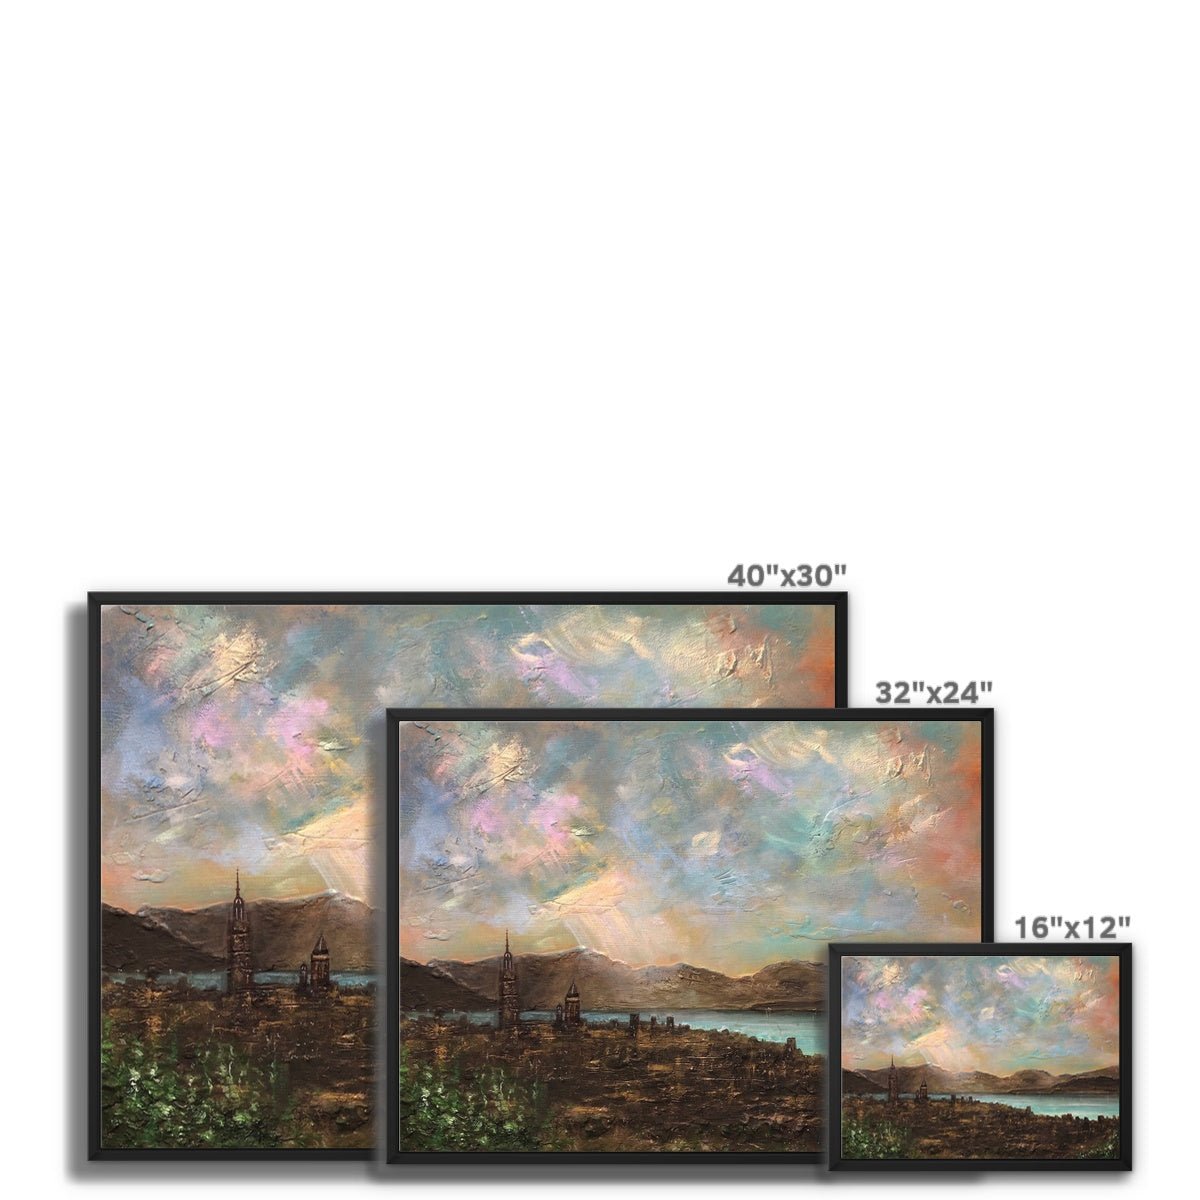 Angels Fingers Over Greenock Painting | Framed Canvas From Scotland-Floating Framed Canvas Prints-River Clyde Art Gallery-Paintings, Prints, Homeware, Art Gifts From Scotland By Scottish Artist Kevin Hunter